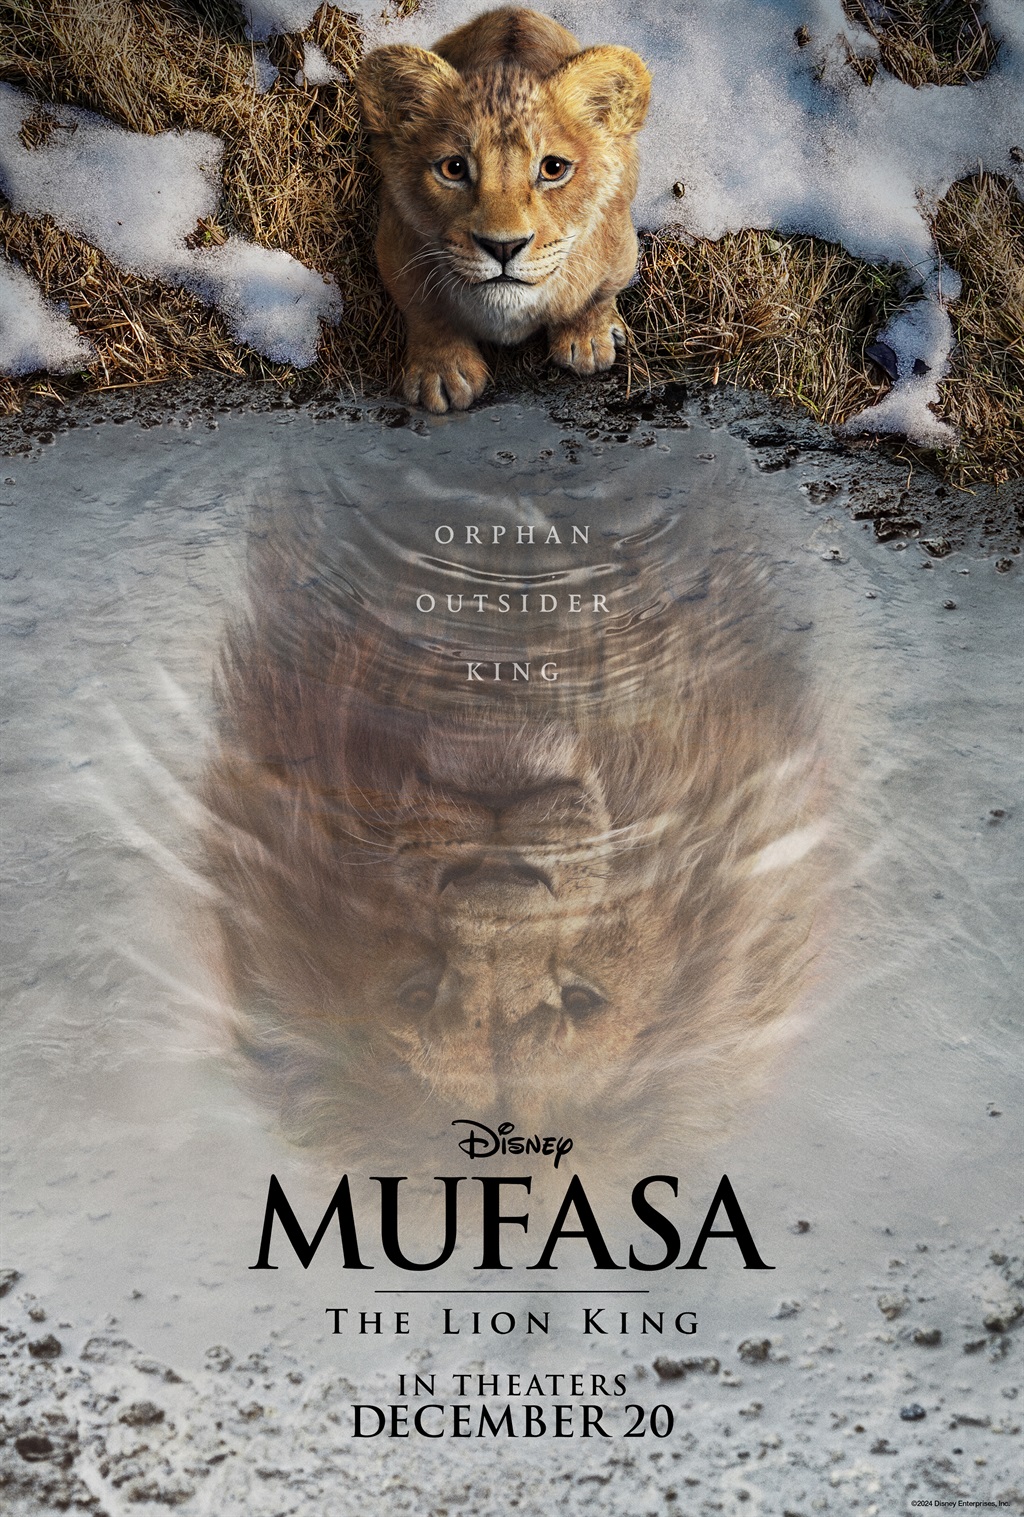 Mufasa: The Lion King opens in cinemas in December this year.